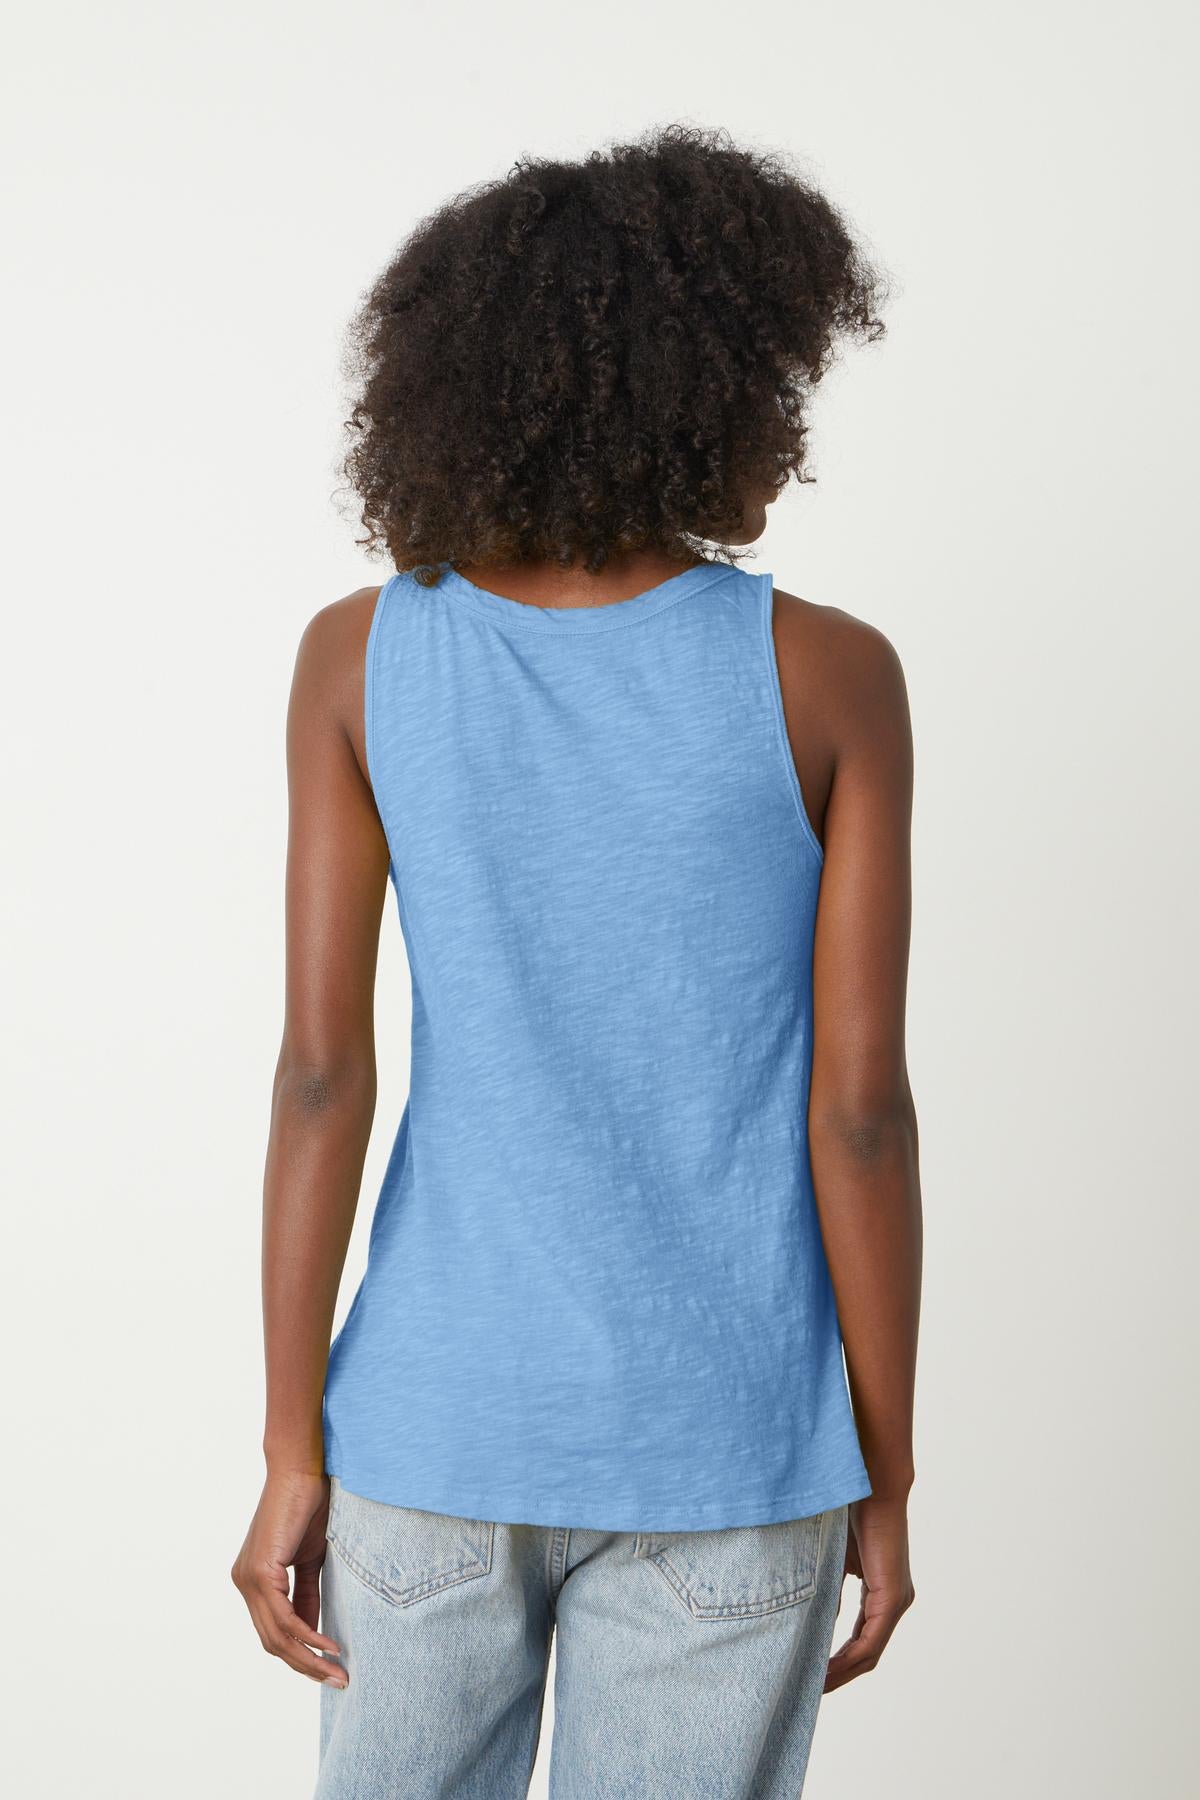 The back view of a woman wearing a Velvet by Graham & Spencer JOY ORIGINAL SLUB SCOOP NECK TANK made of soft cotton.-35201175683265